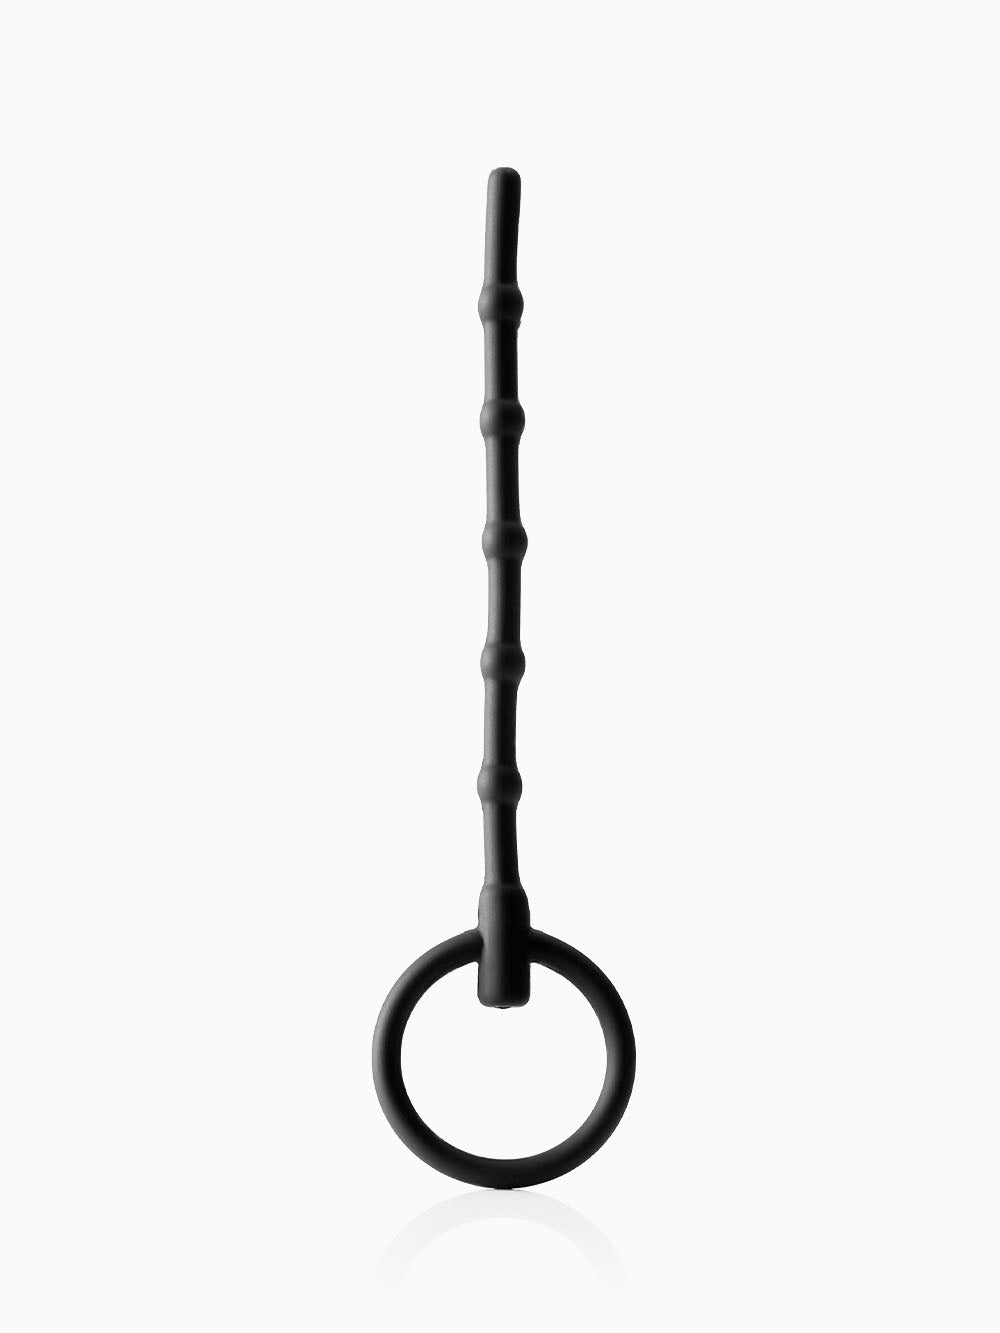 Pillow Talk Urethral Rod with Ring 6 Inches